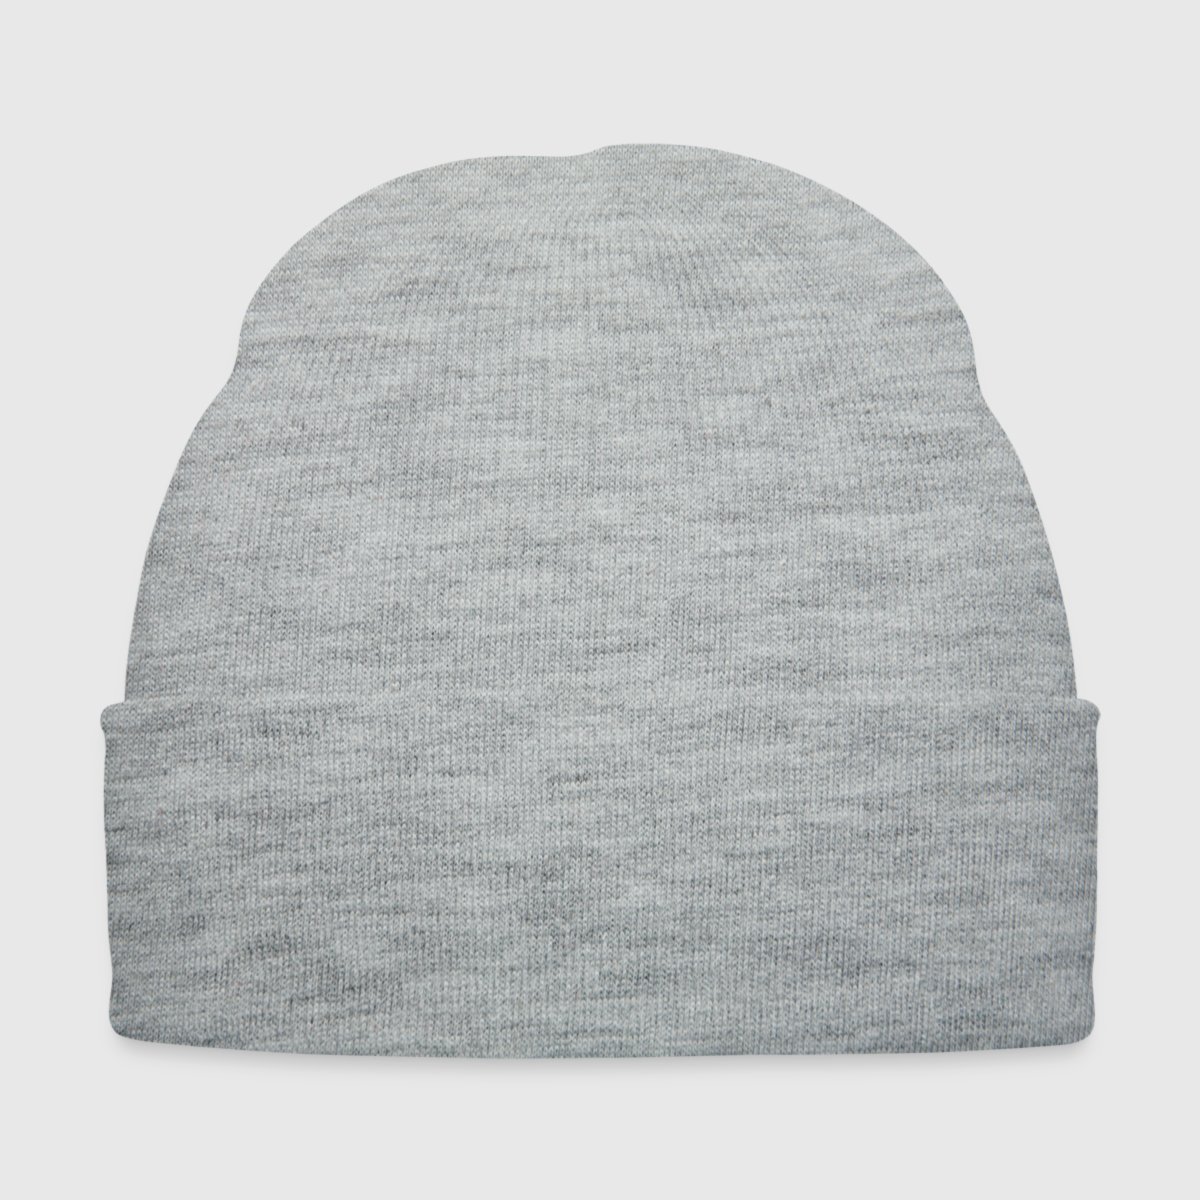 Knit Cap with Cuff Print - Front